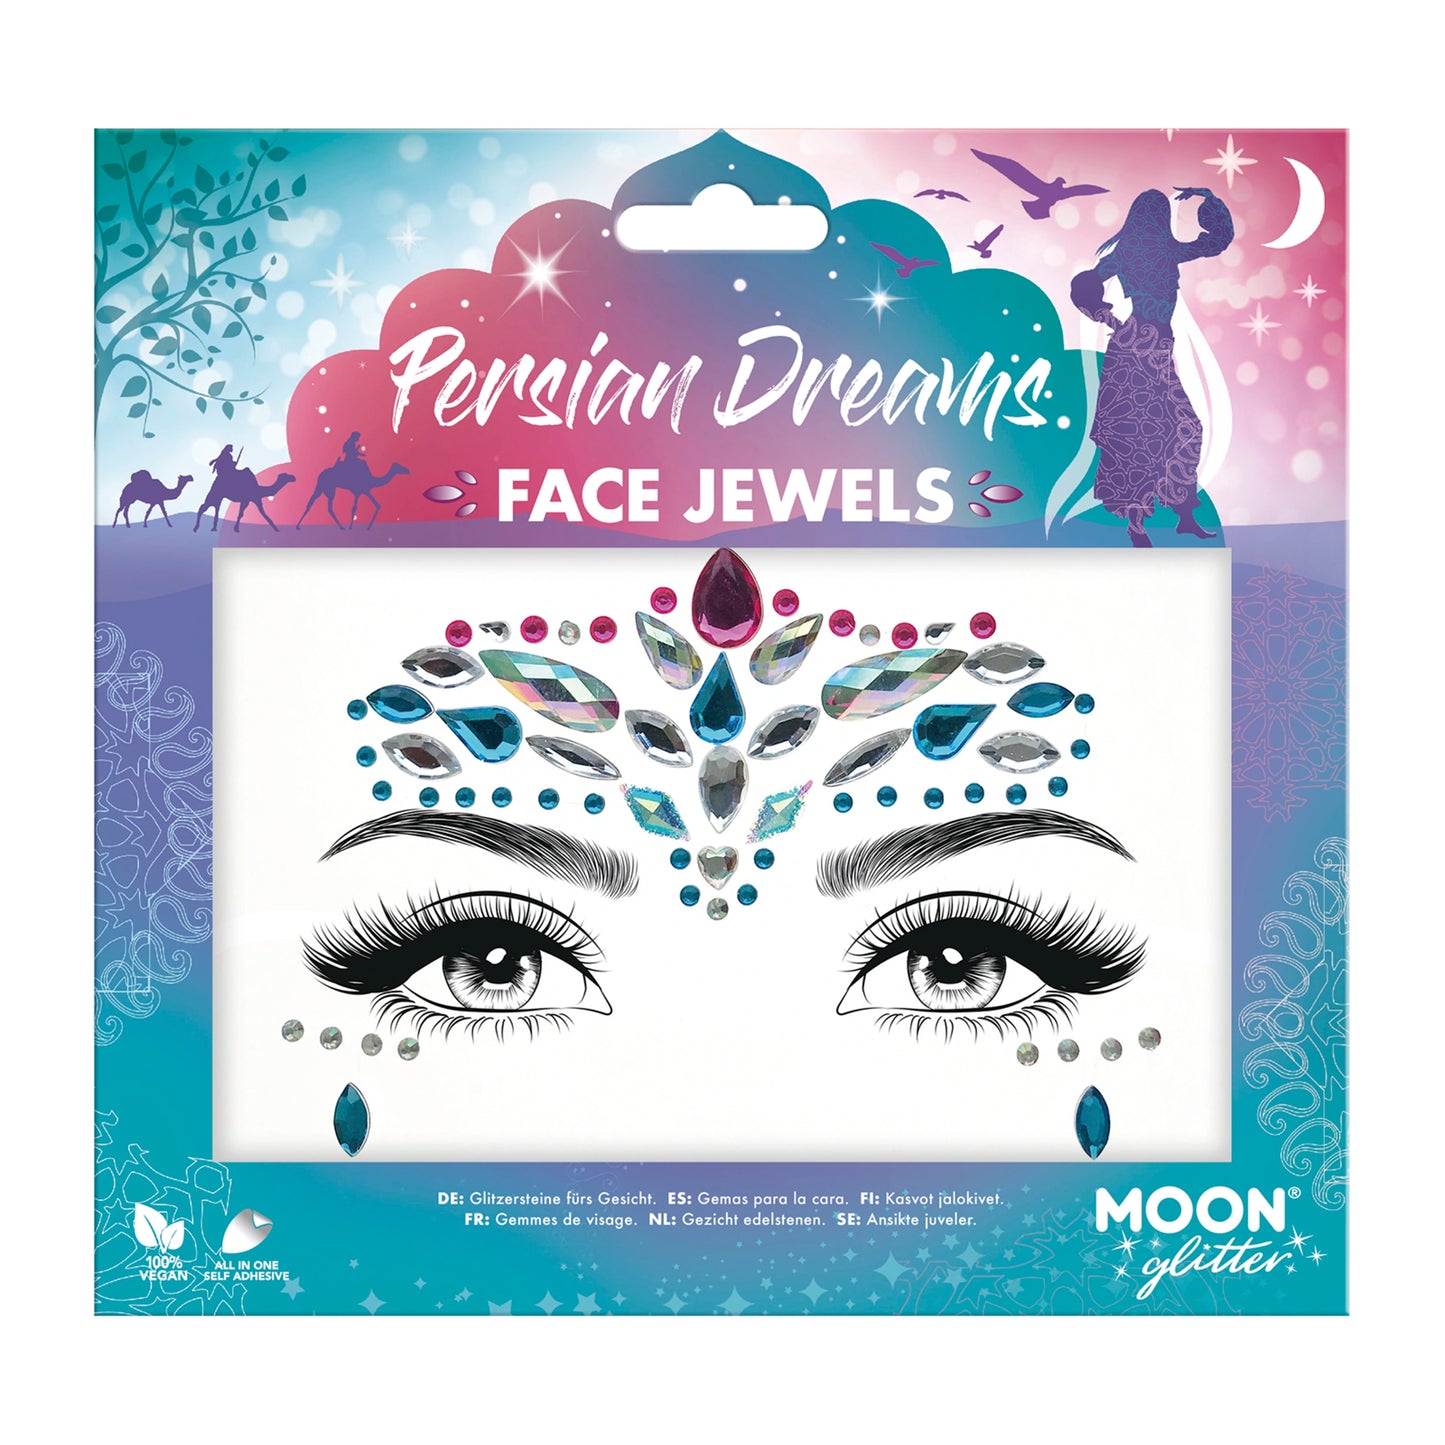 Face Jewels and Face Gems - Persian Dreams